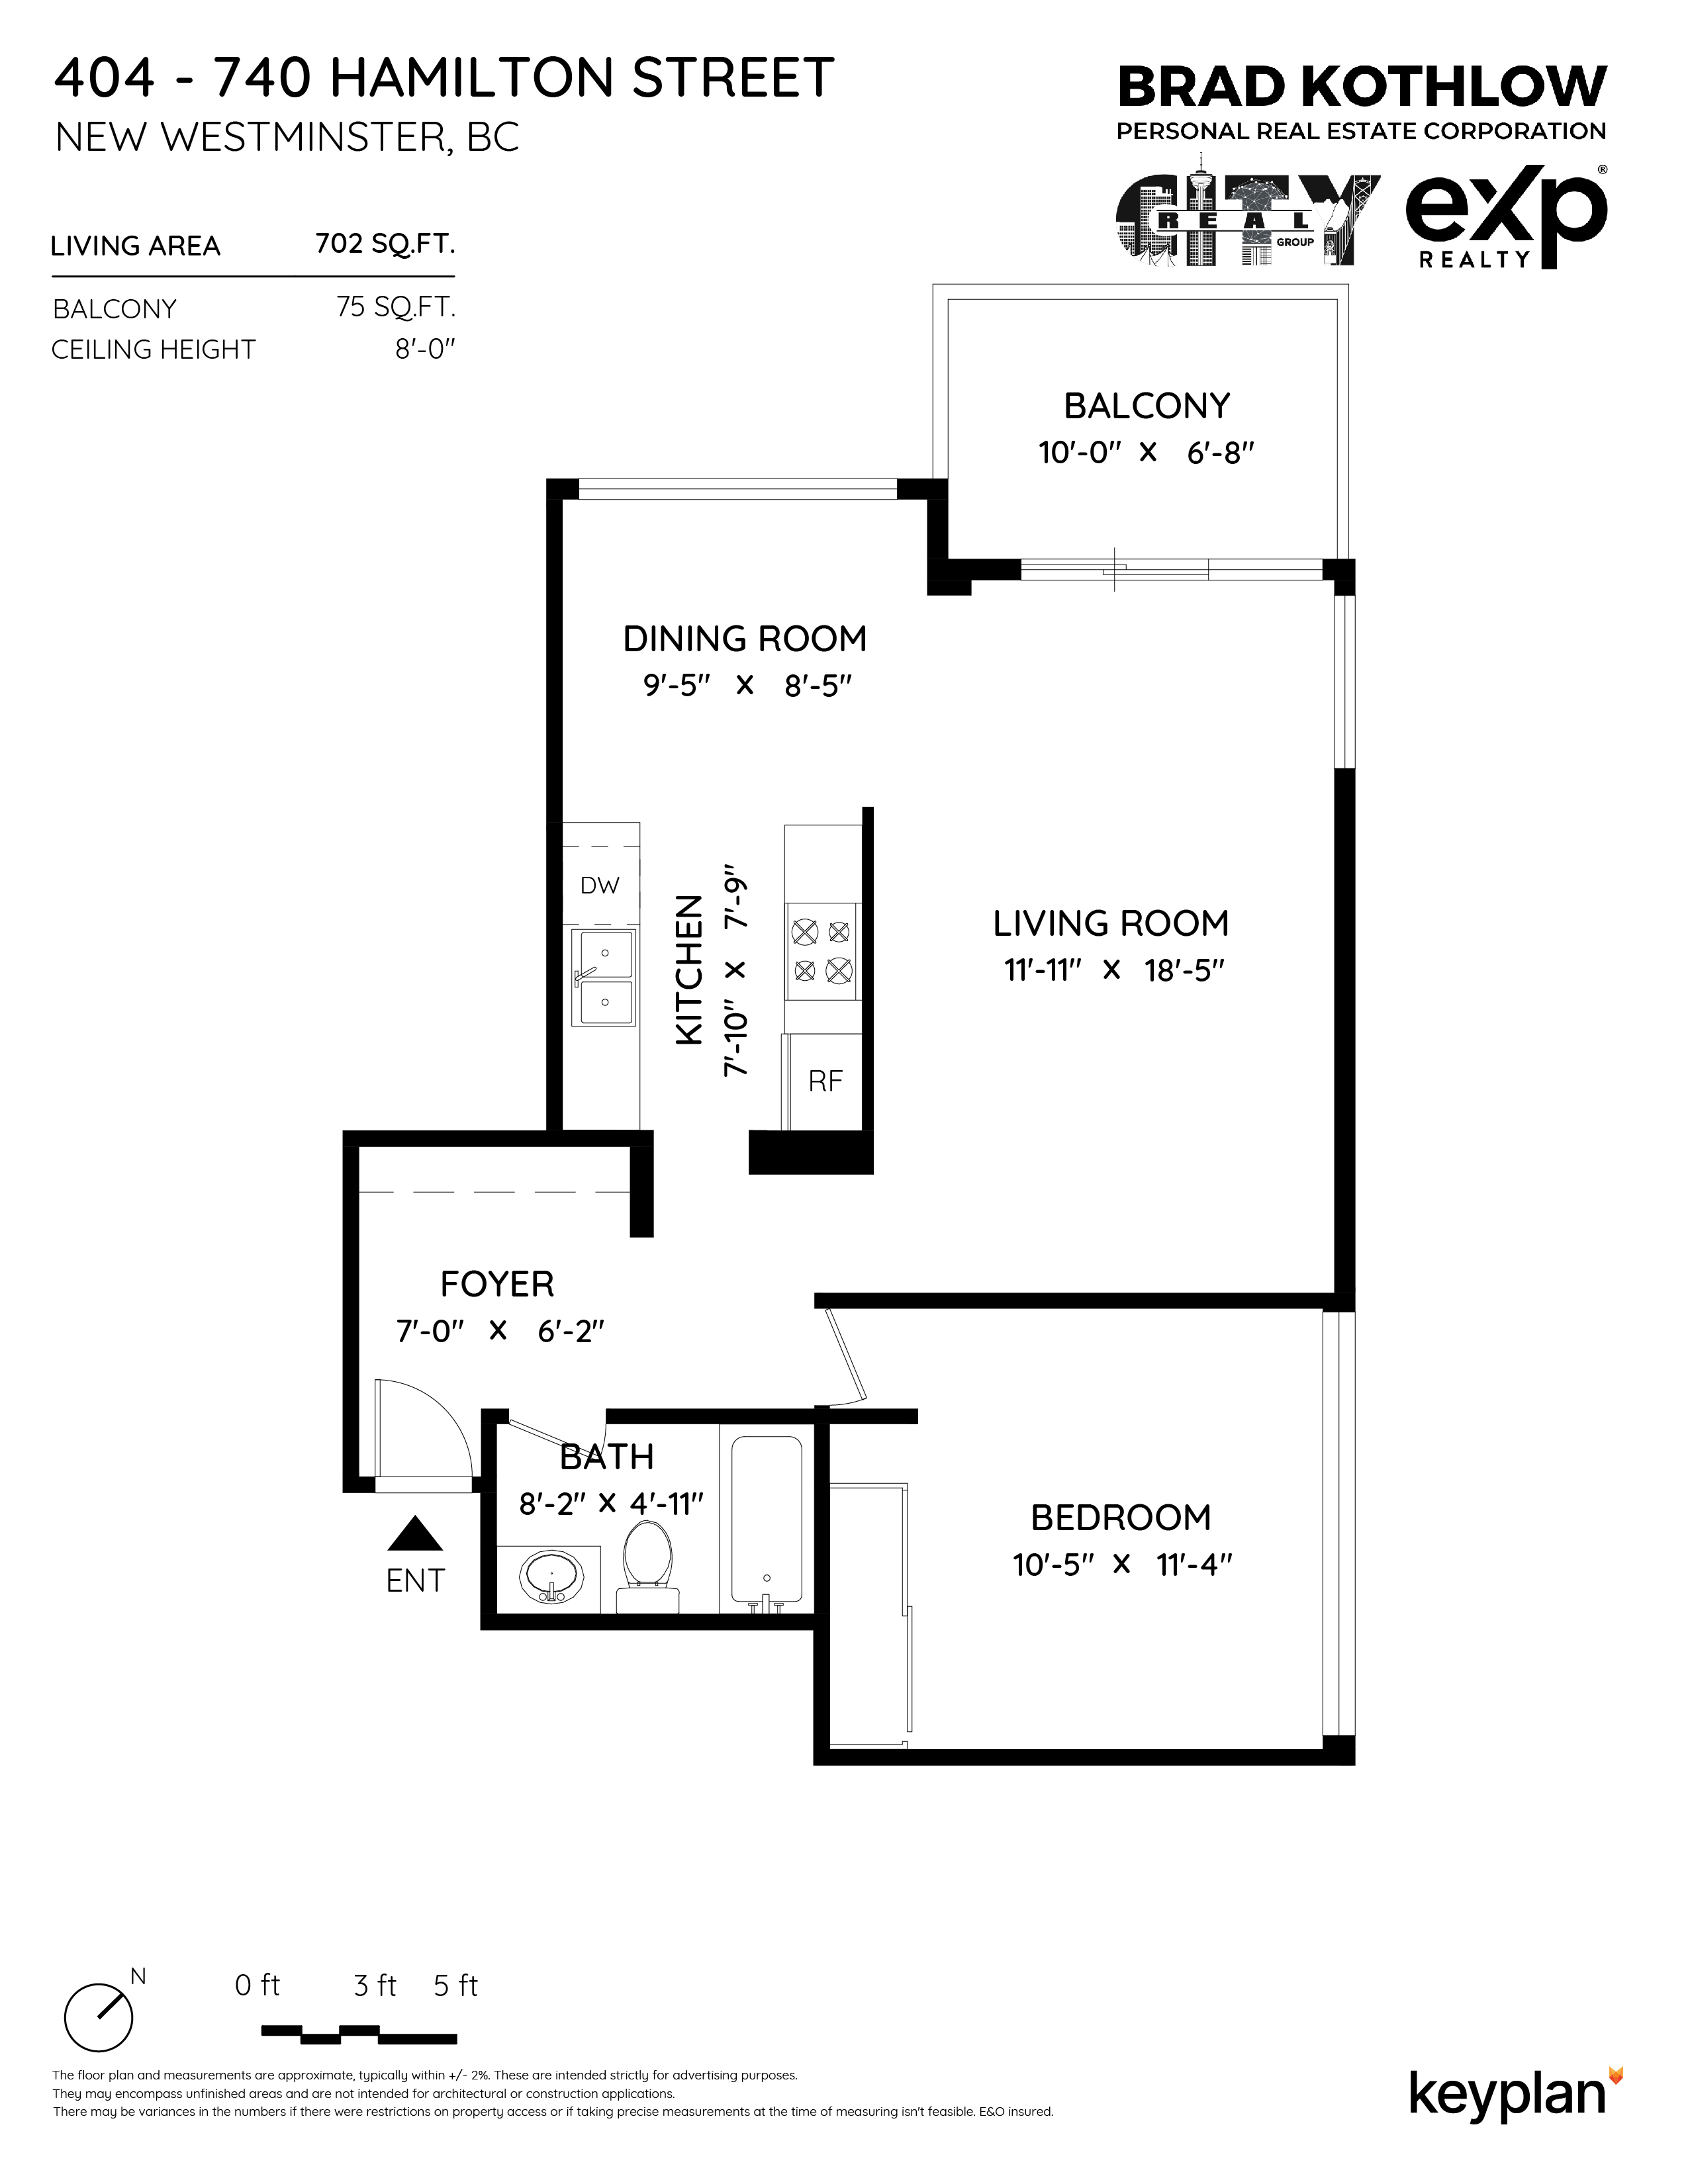 Real City Group - Unit 404 - 740 Hamilton Street, New Westminster, BC, Canada | Floor Plan 1